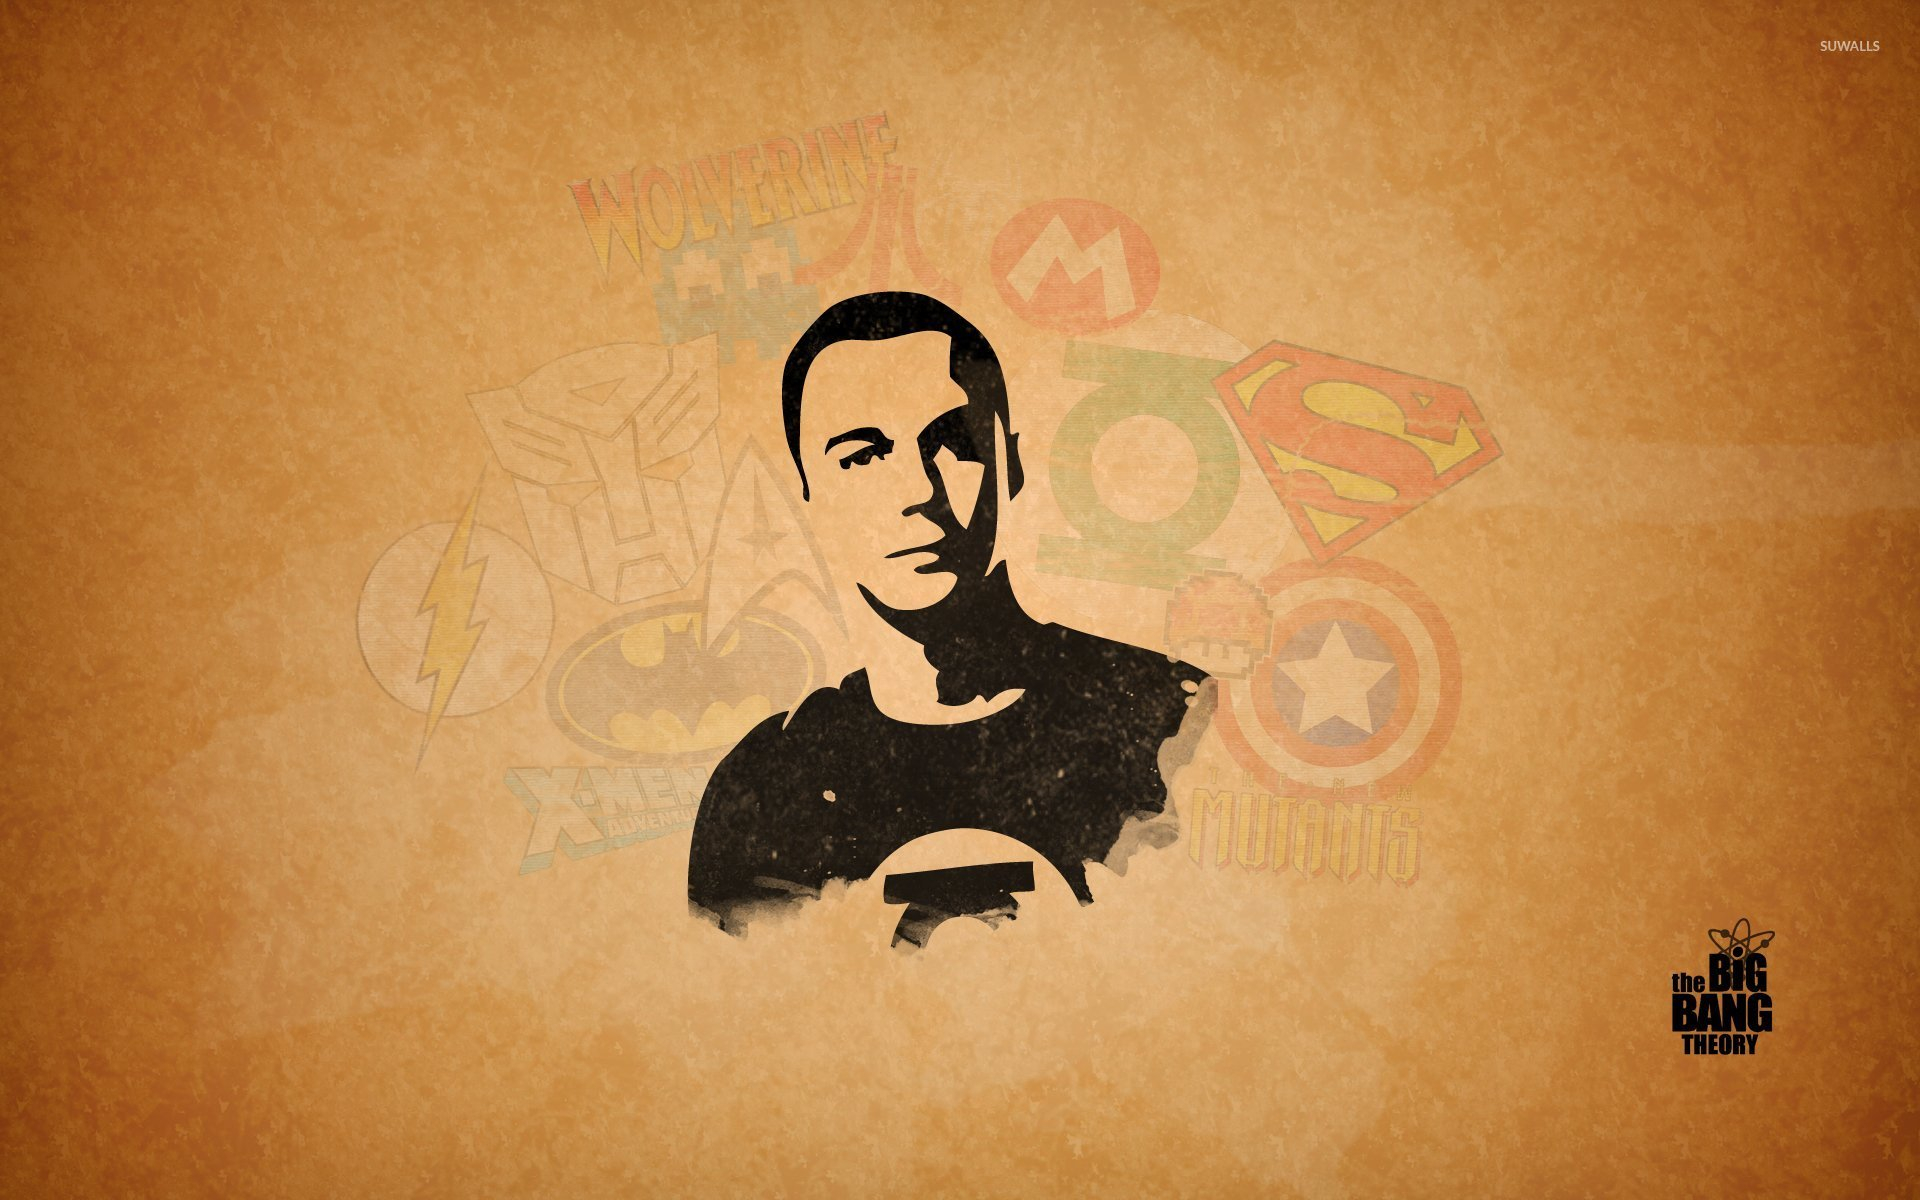 1920x1200 Free download Sheldon Cooper from The Big Bang Theory wallpaper TV Show [] for your Desktop, Mobile \u0026 Tablet | Explore 15+ The Big Bang Theory 2019 Wallpapers | The Big Bang